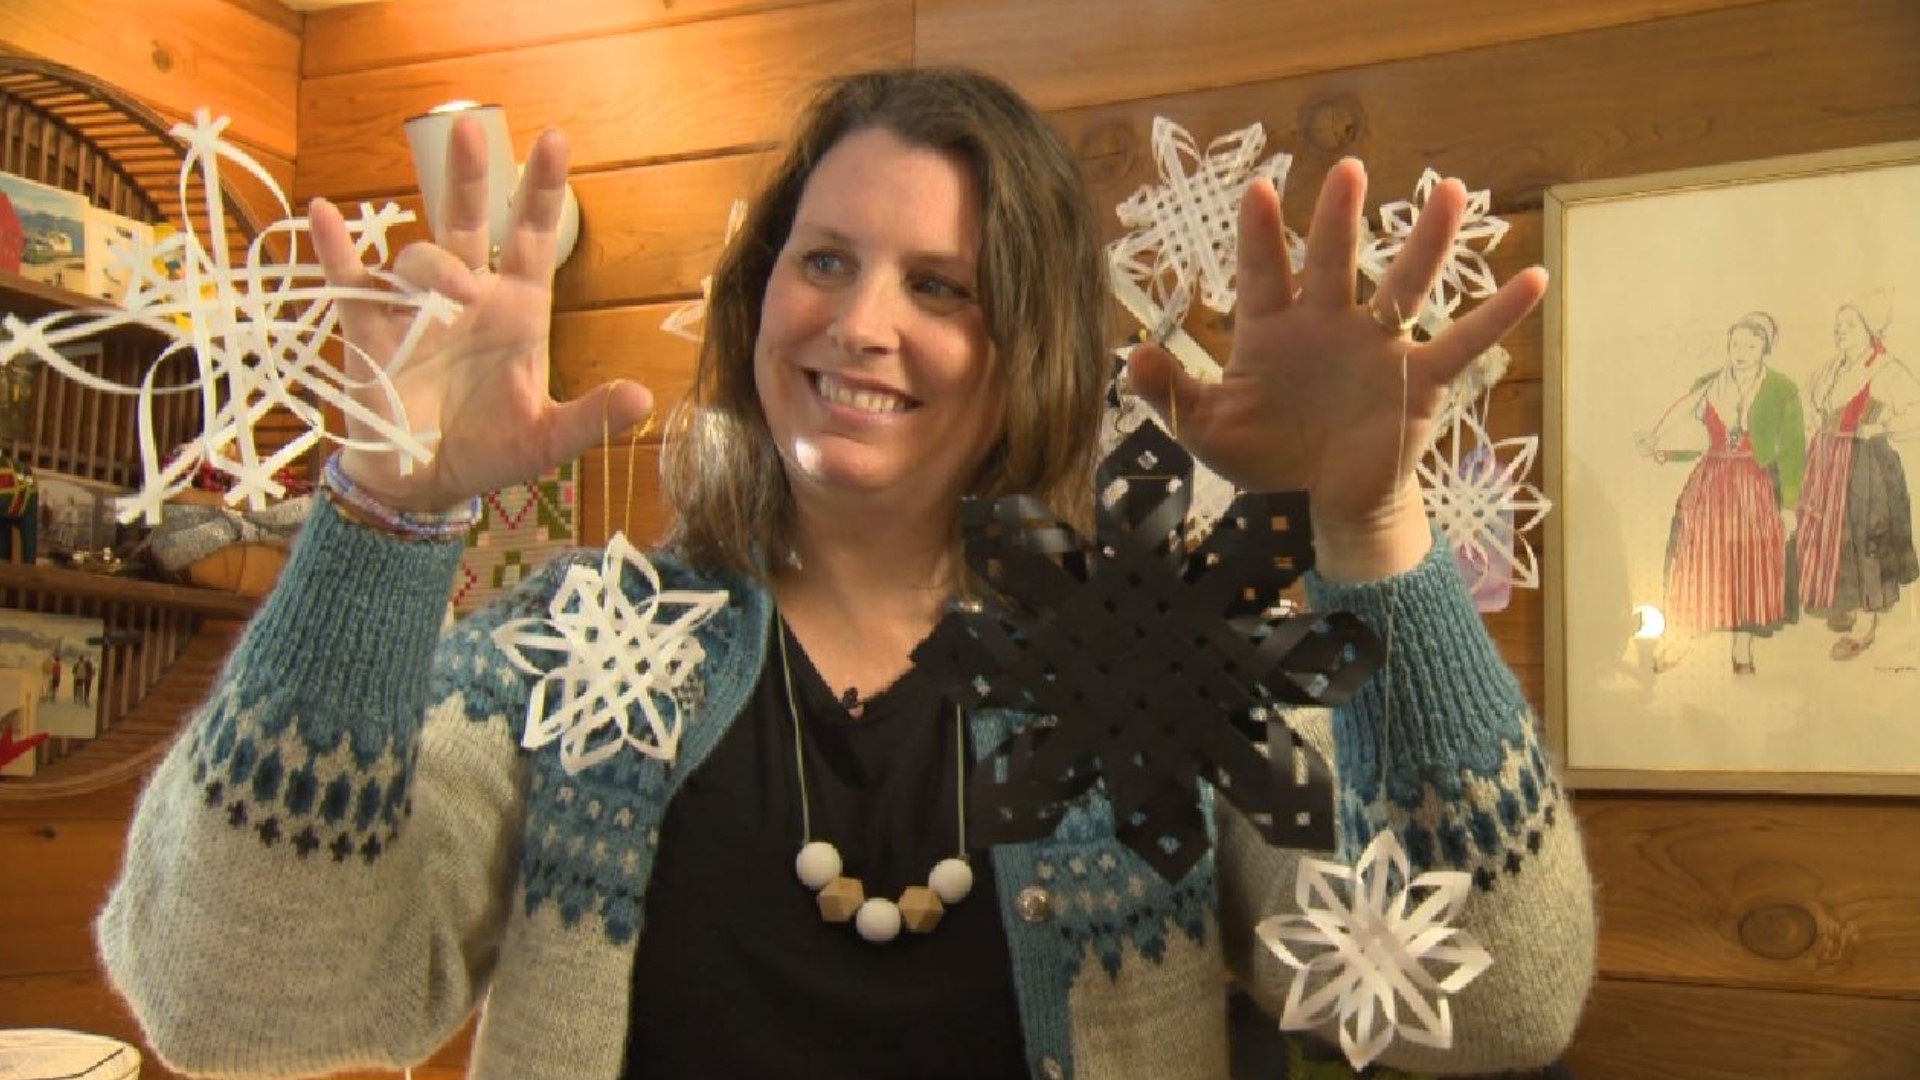 Jaffrey Bagge is connecting to her heritage and helping the environment, all at the same time. #k5evening